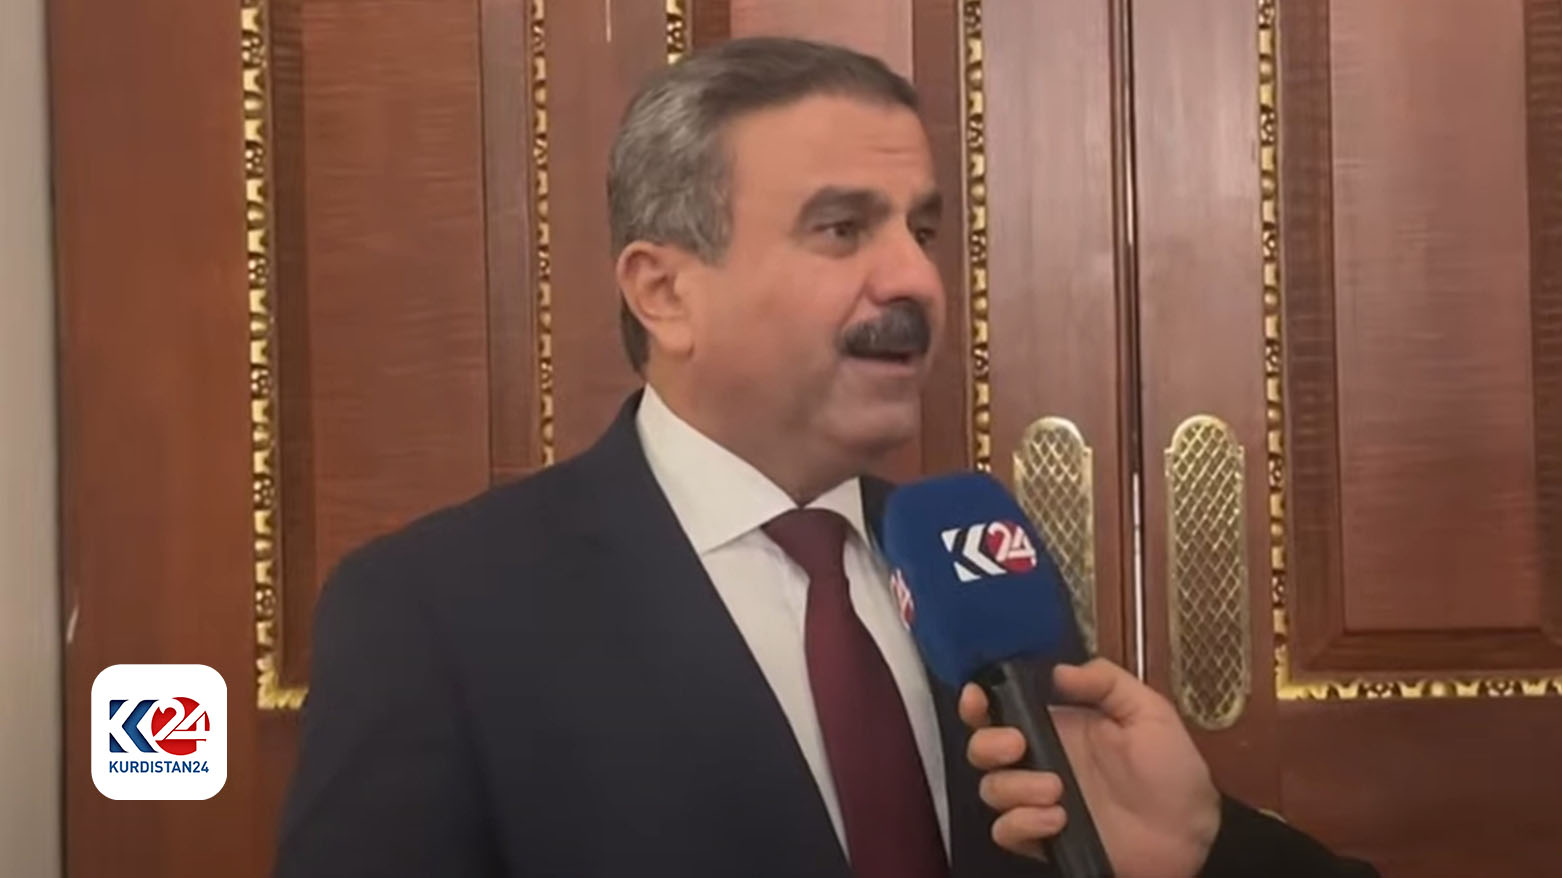 KDP President Masoud Barzani Iraqi PMF leader discuss maintaining stability in the region